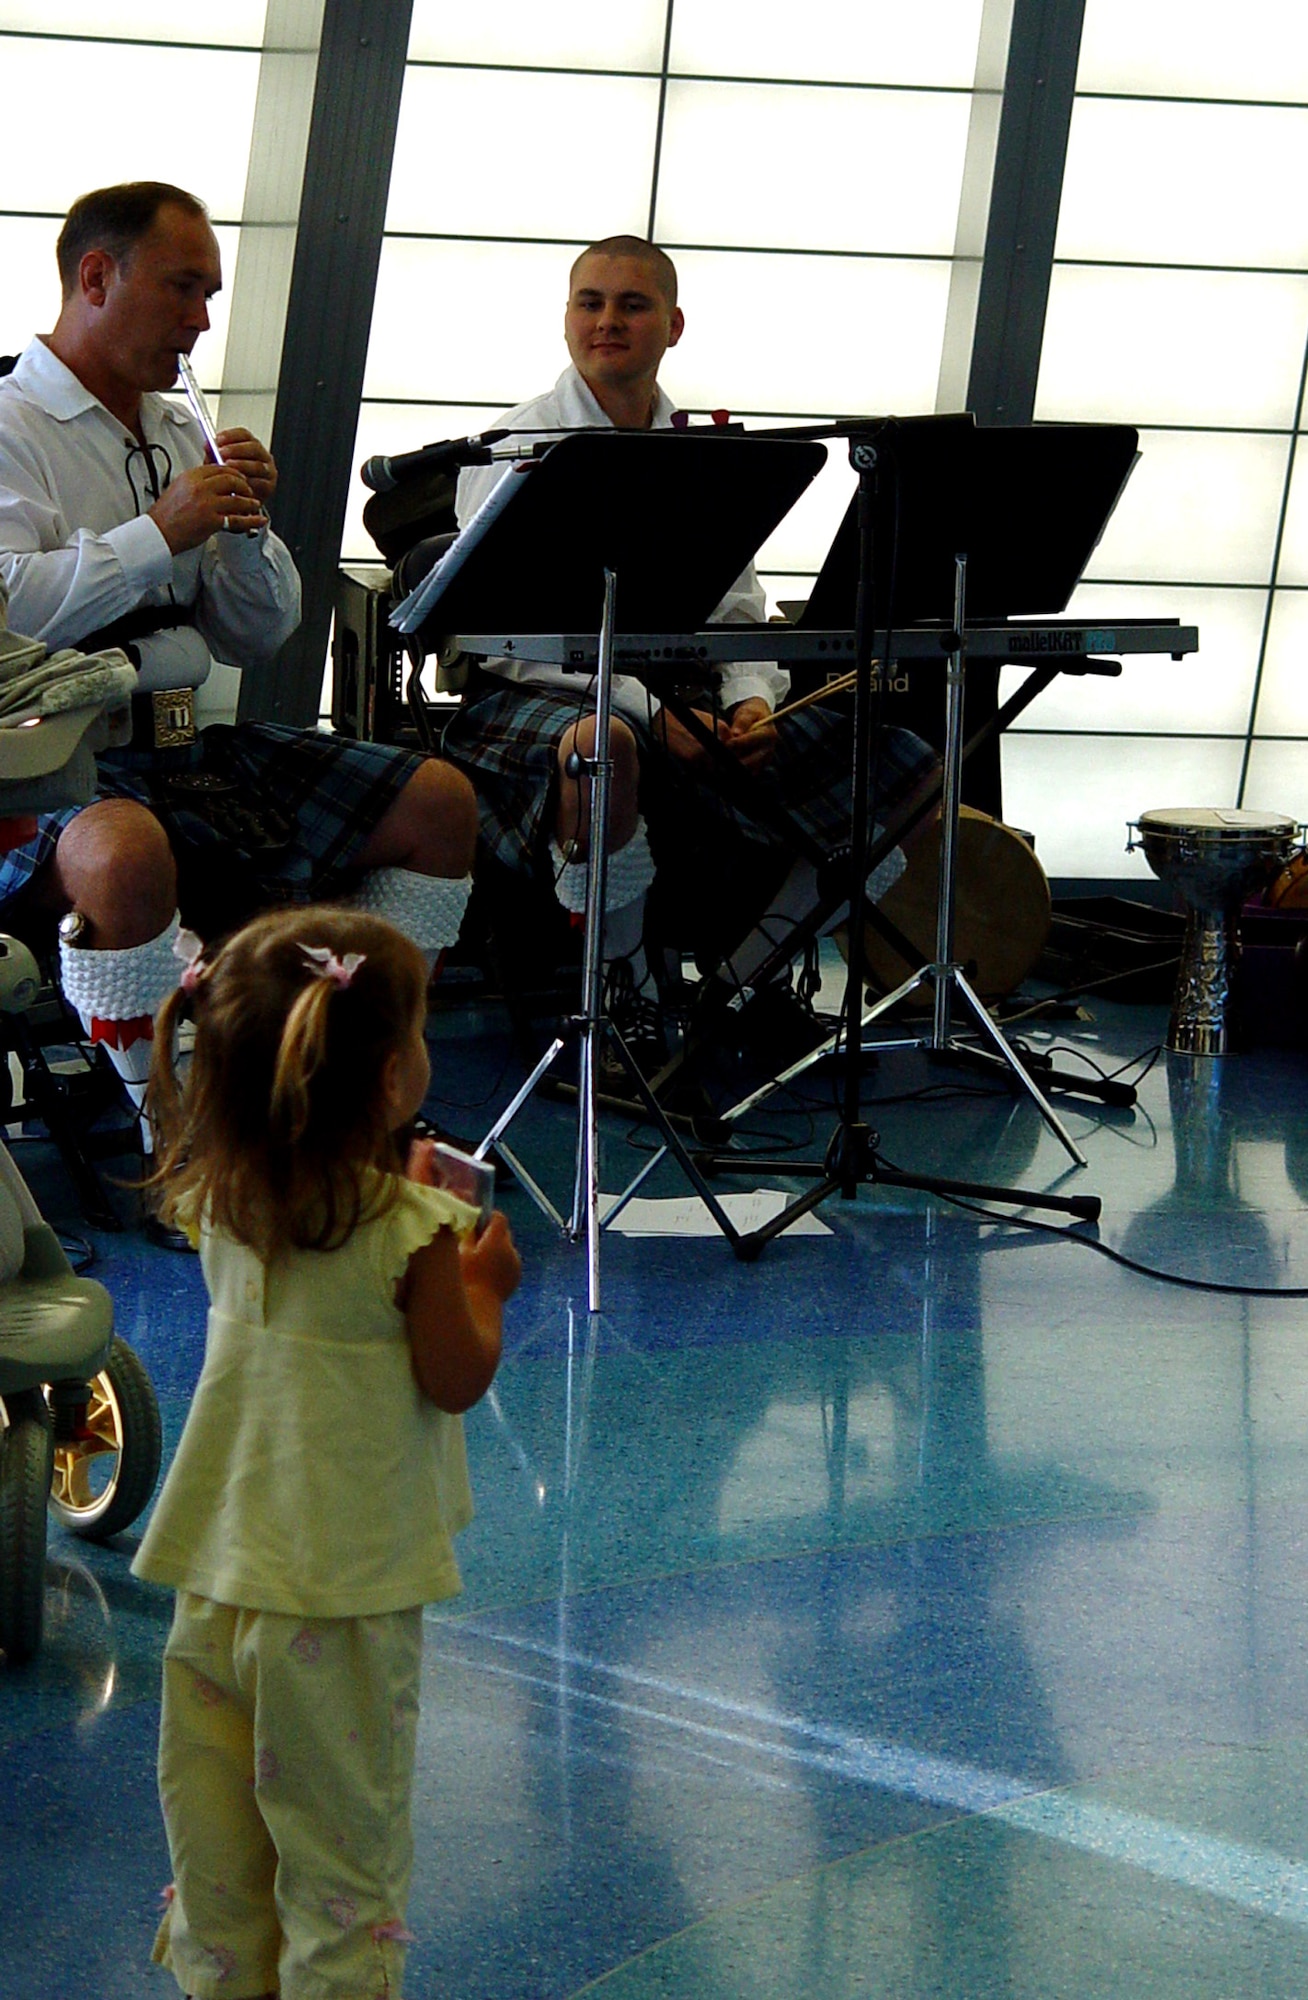 Master Sgt. Scott Gunn and Senior Airman Tim Shaw, members of the Band of the Air Force Reserve's Celtic ensemble, Southern Aire, perform at the Miami Children's Museum on May 19, 2006, as 2 year old Brianna Page looks on.  The Band of the Air Force Reserve, from Robins Air Force Base, Ga., performed nine times in South Florida as part of a community outreach project. (U.S. Air Force photo/Lisa Macias)